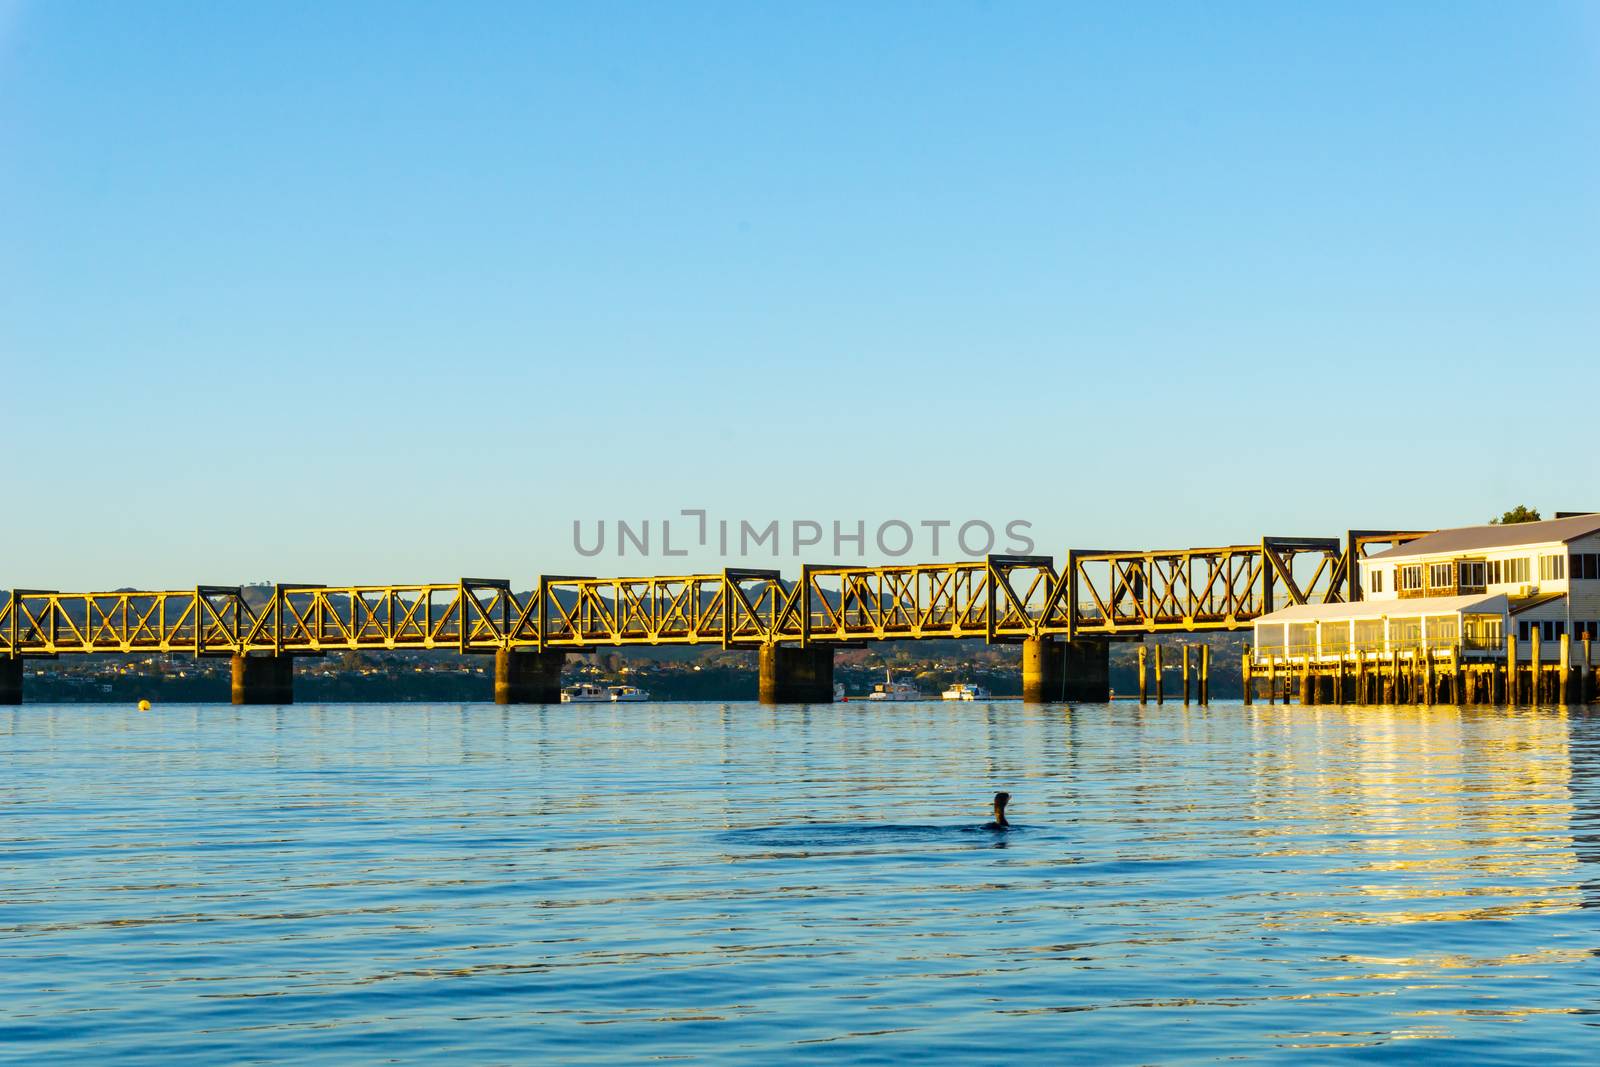 Tauranga Railway bridge catches glow from sunrise in distance across  blue calm water in low level background image.